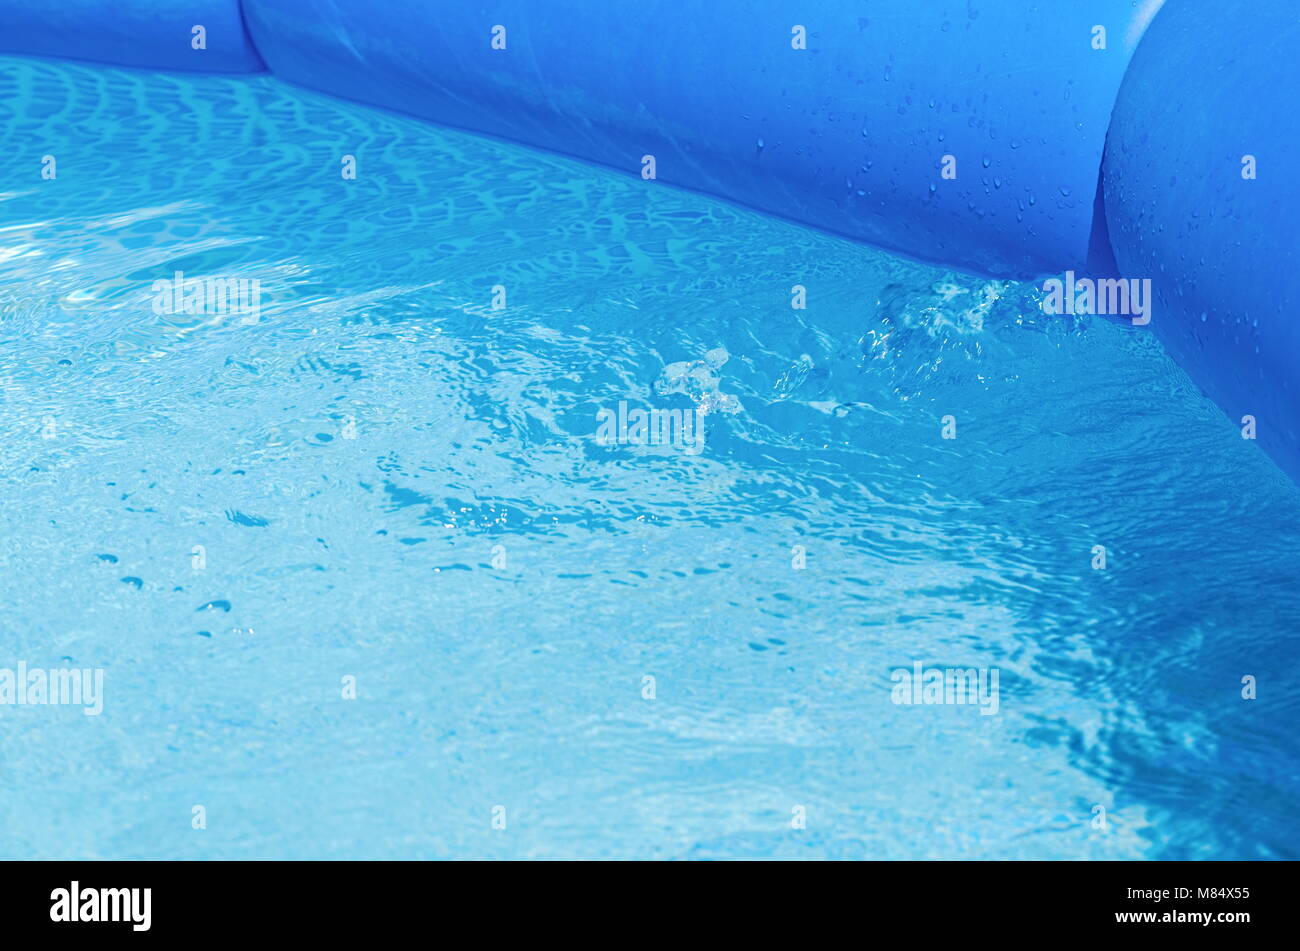 Filled Blue Inflatable Garden Pool with Splashing Water Closeup Stock Photo